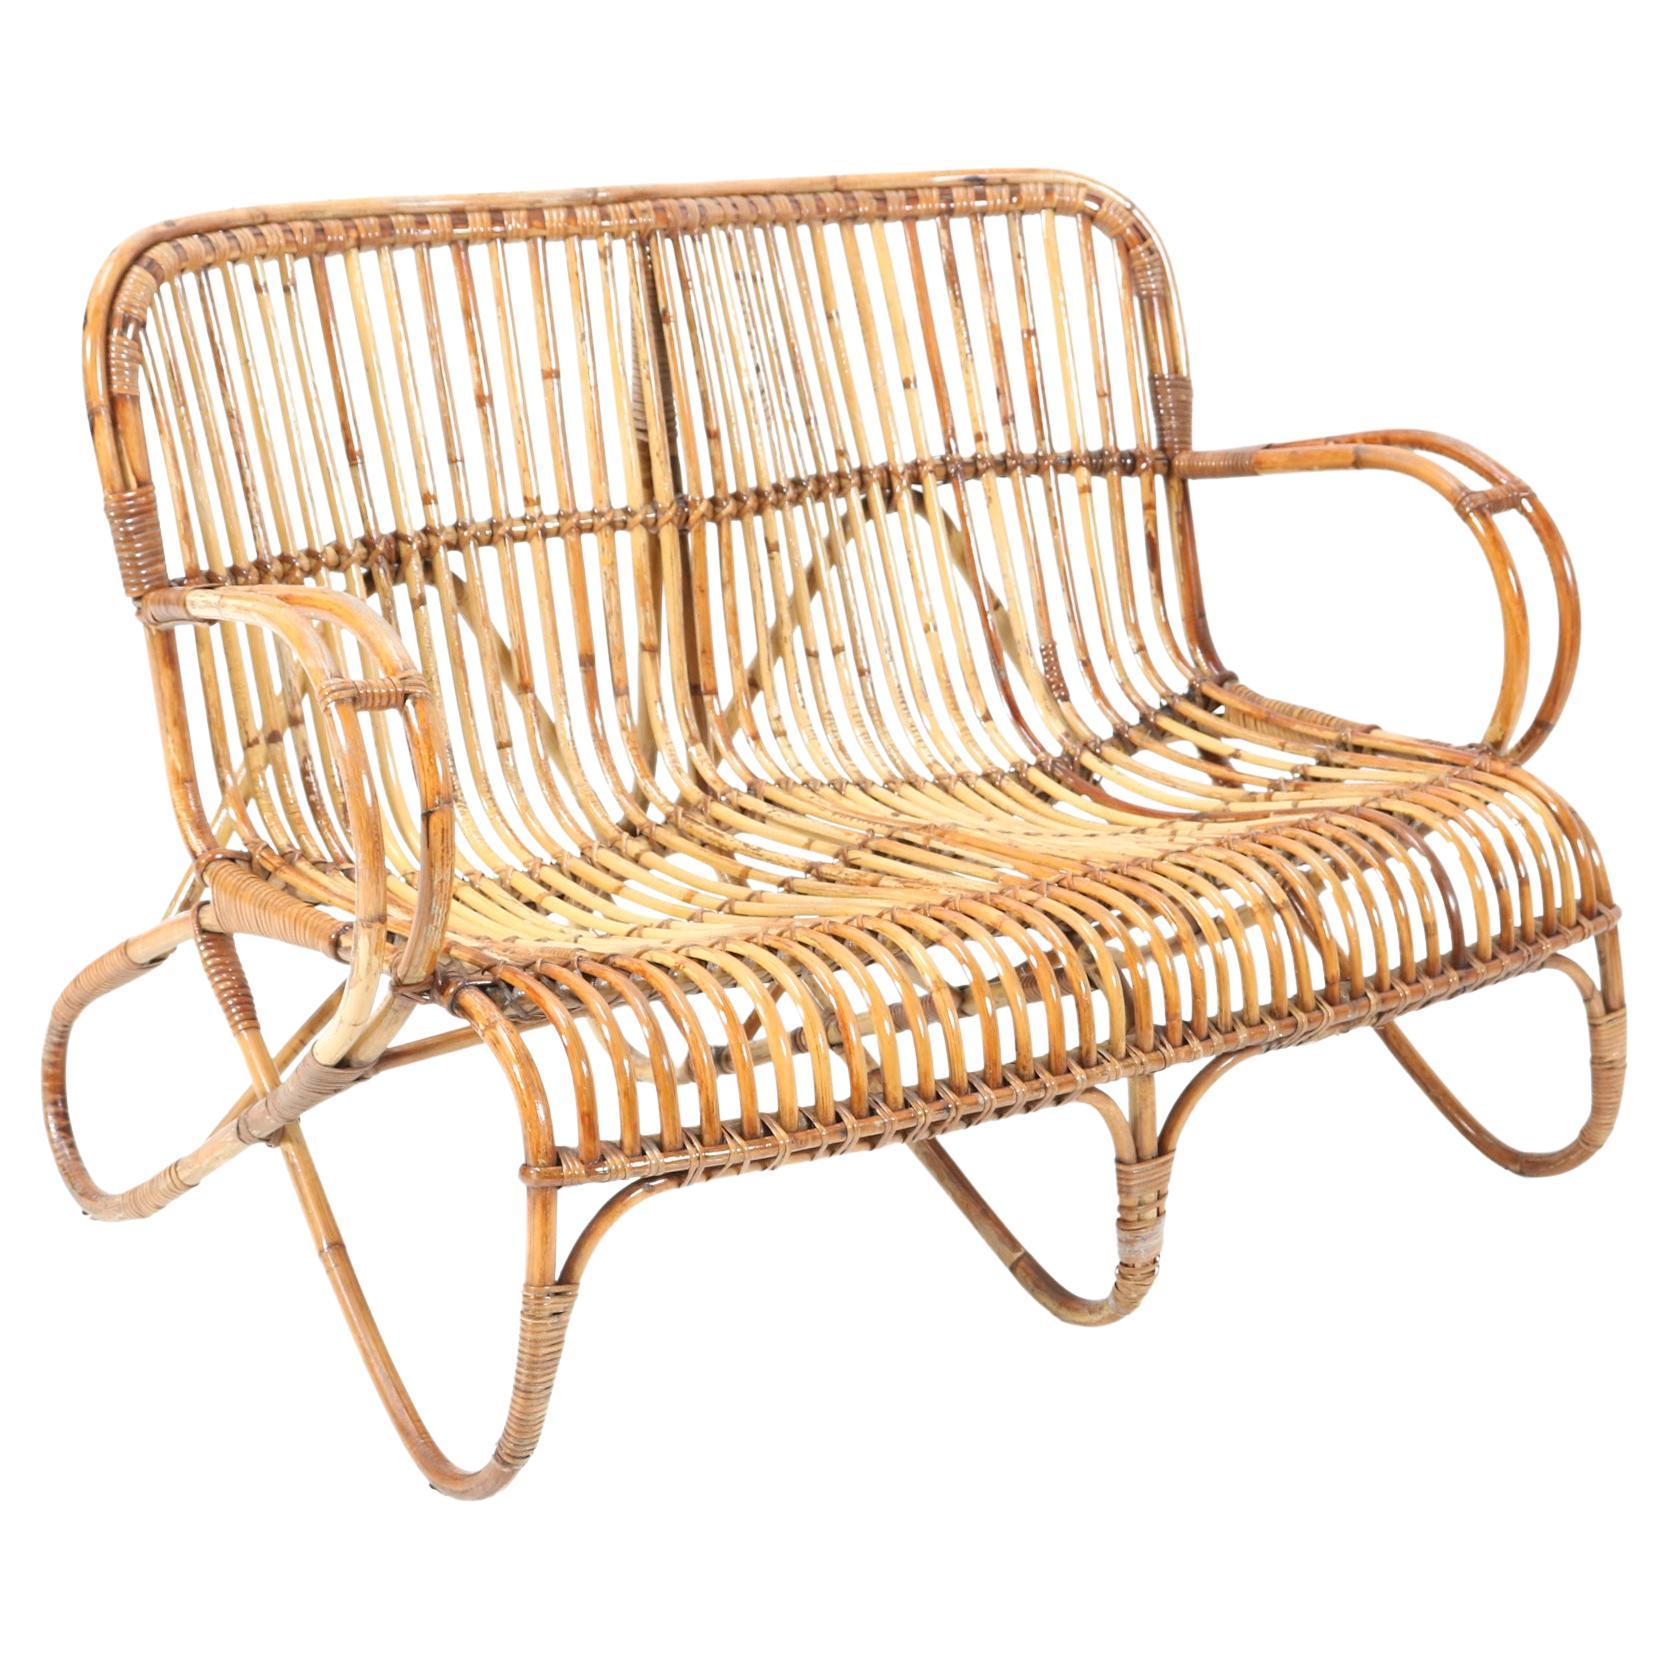 Vintage Mid-Century Modern Rattan and Bamboo Love Seat or Sofa by Rohe, 1960s